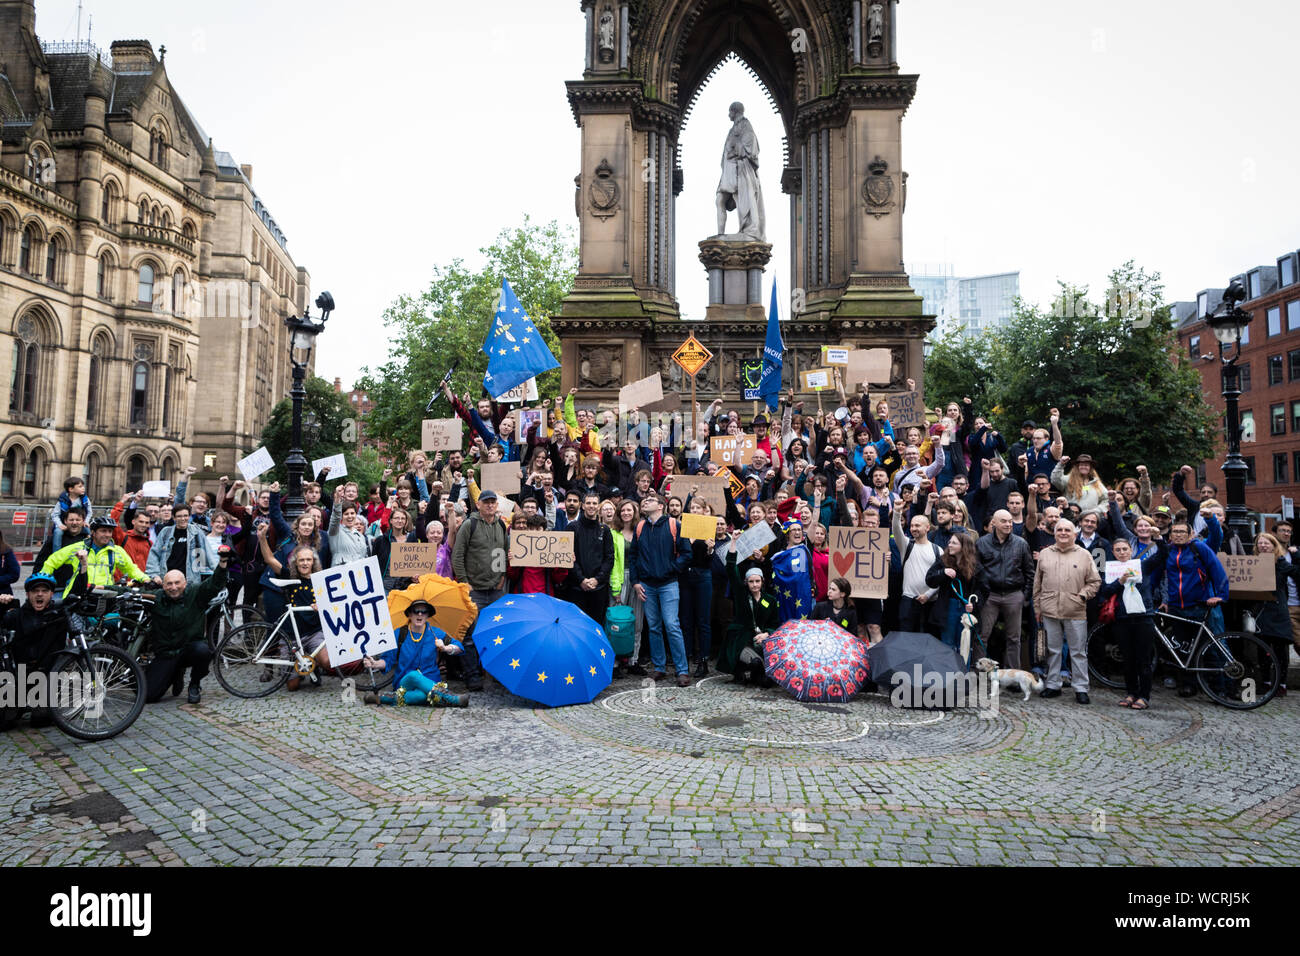 Manchester, UK. 28 August, 2019. Demonstrators gather at the Town Hall, Albert Square this evening in light of the Queen approving the suspension of Parliament until October. Andy Barton/Alamy Live News Stock Photo